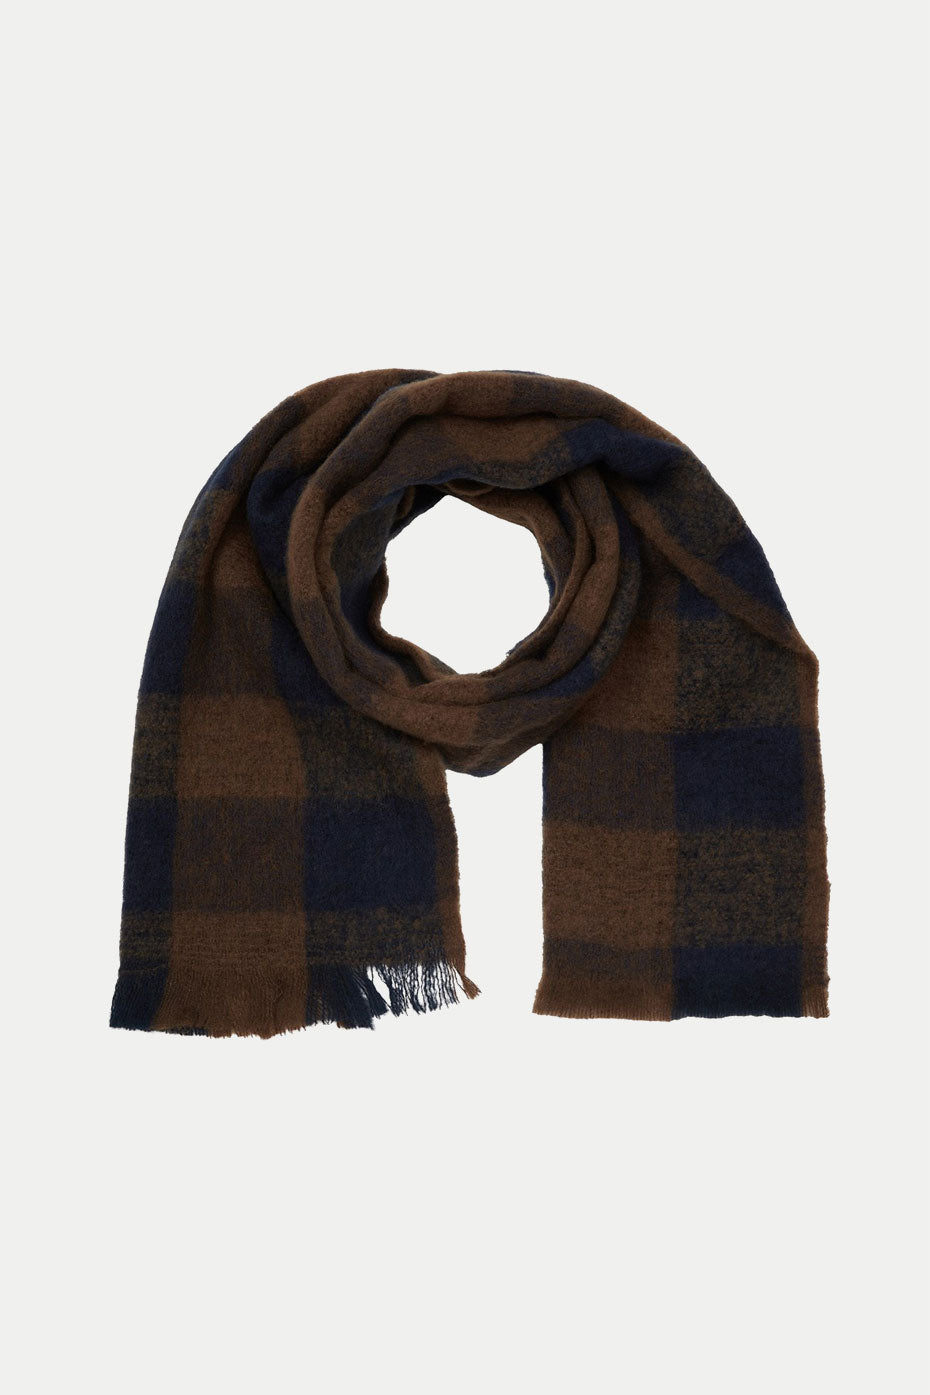 Selected Homme Sky Captain Hogar Checked Wool Scarf